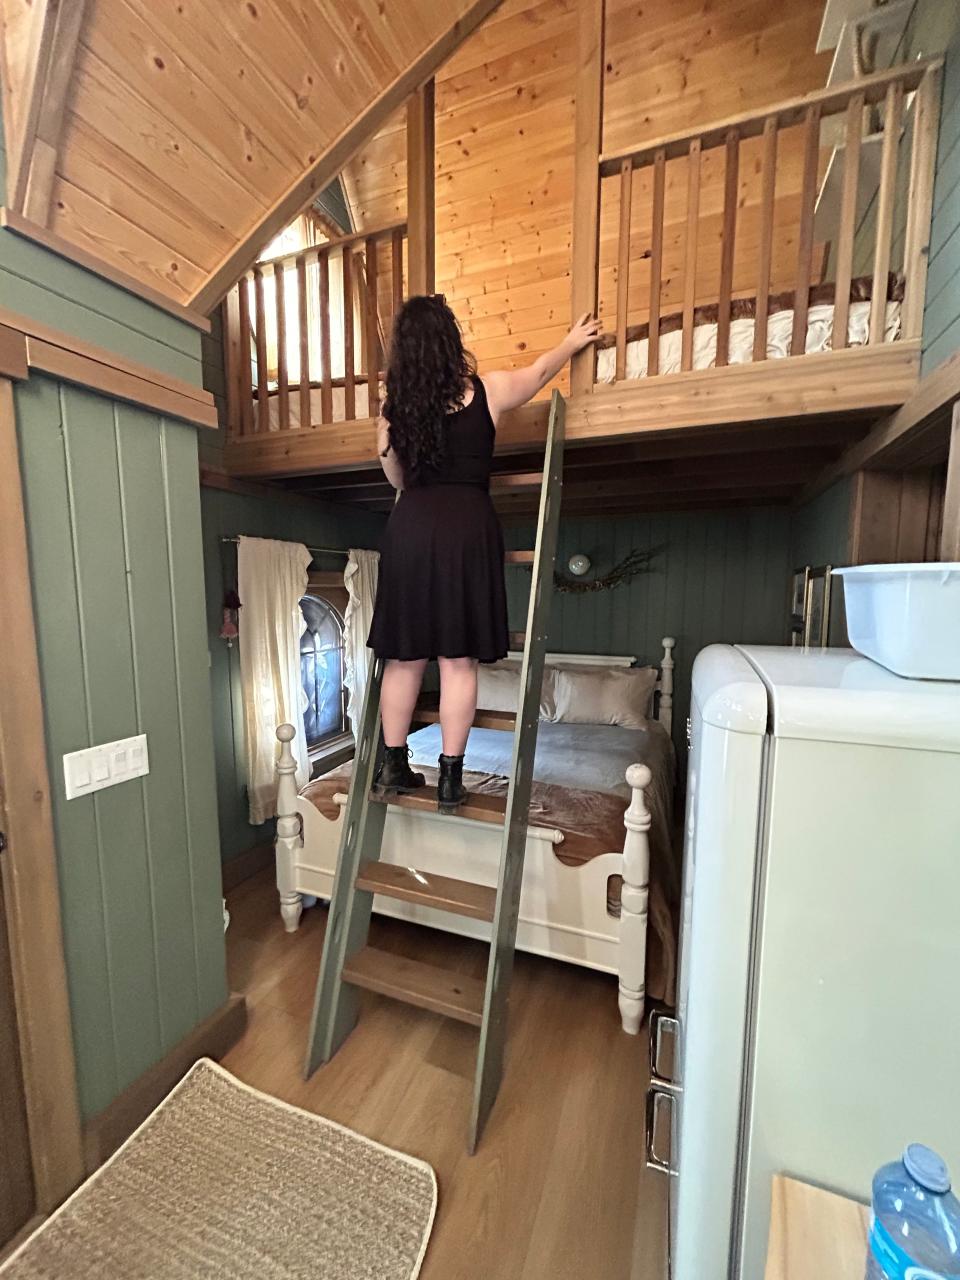 paige climbing the ladder in rapunzel's cottage